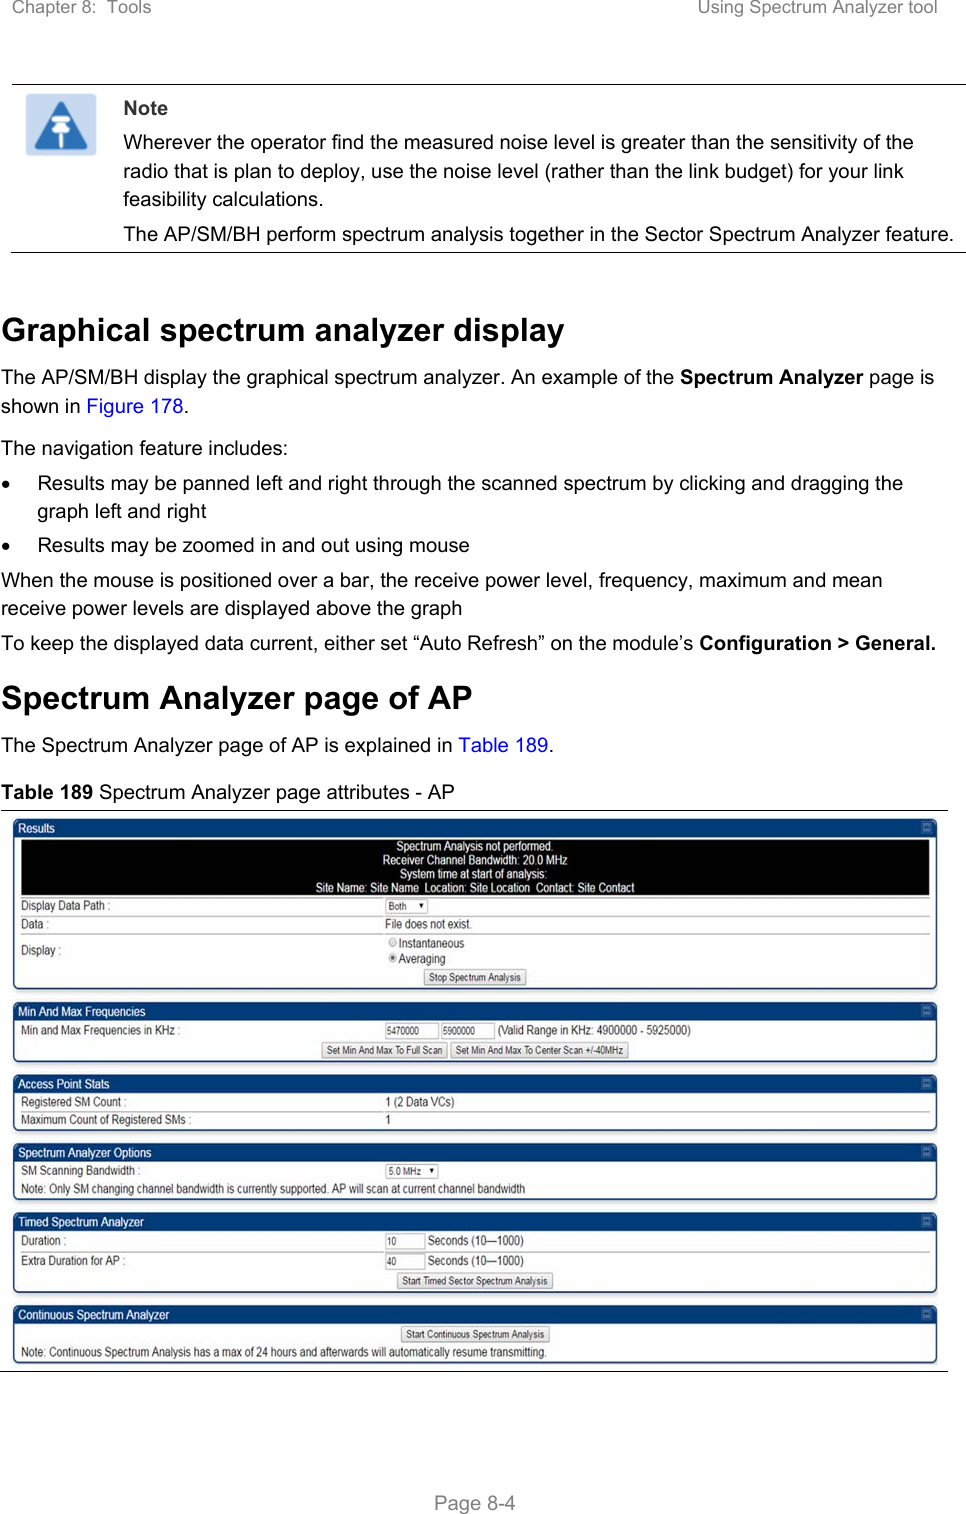 Chapter 8:  Tools  Using Spectrum Analyzer tool   Page 8-4  Note Wherever the operator find the measured noise level is greater than the sensitivity of the radio that is plan to deploy, use the noise level (rather than the link budget) for your link feasibility calculations. The AP/SM/BH perform spectrum analysis together in the Sector Spectrum Analyzer feature.  Graphical spectrum analyzer display The AP/SM/BH display the graphical spectrum analyzer. An example of the Spectrum Analyzer page is shown in Figure 178. The navigation feature includes:   Results may be panned left and right through the scanned spectrum by clicking and dragging the graph left and right   Results may be zoomed in and out using mouse When the mouse is positioned over a bar, the receive power level, frequency, maximum and mean receive power levels are displayed above the graph To keep the displayed data current, either set “Auto Refresh” on the module’s Configuration &gt; General. Spectrum Analyzer page of AP The Spectrum Analyzer page of AP is explained in Table 189. Table 189 Spectrum Analyzer page attributes - AP 